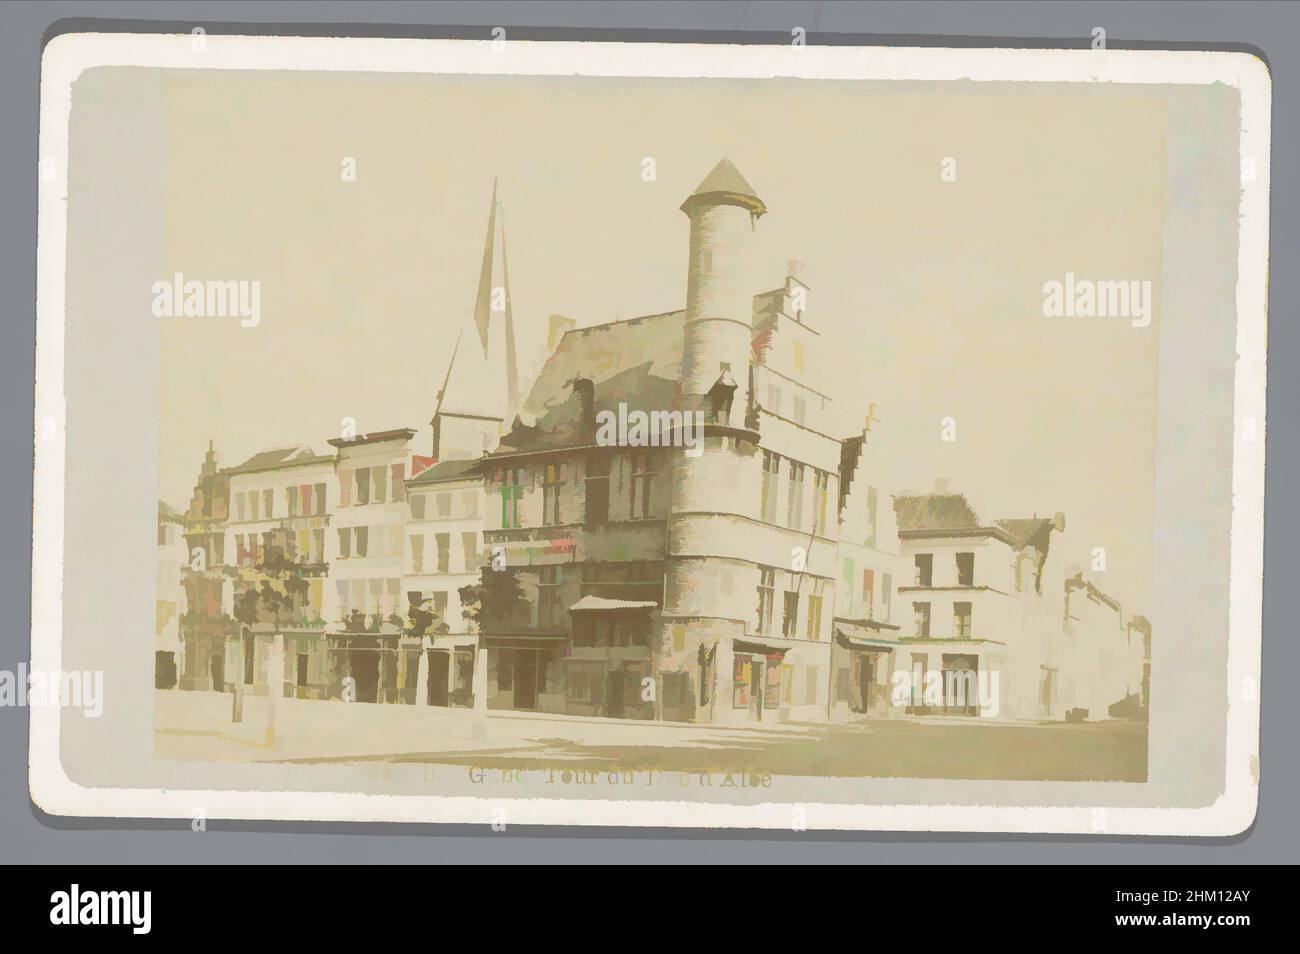 Art inspired by House the Toreken in Ghent, Gand. Tour du Duc d'Albe, Ghent, 1855 - 1885, paper, cardboard, albumen print, height 107 mm × width 68 mm, Classic works modernized by Artotop with a splash of modernity. Shapes, color and value, eye-catching visual impact on art. Emotions through freedom of artworks in a contemporary way. A timeless message pursuing a wildly creative new direction. Artists turning to the digital medium and creating the Artotop NFT Stock Photo